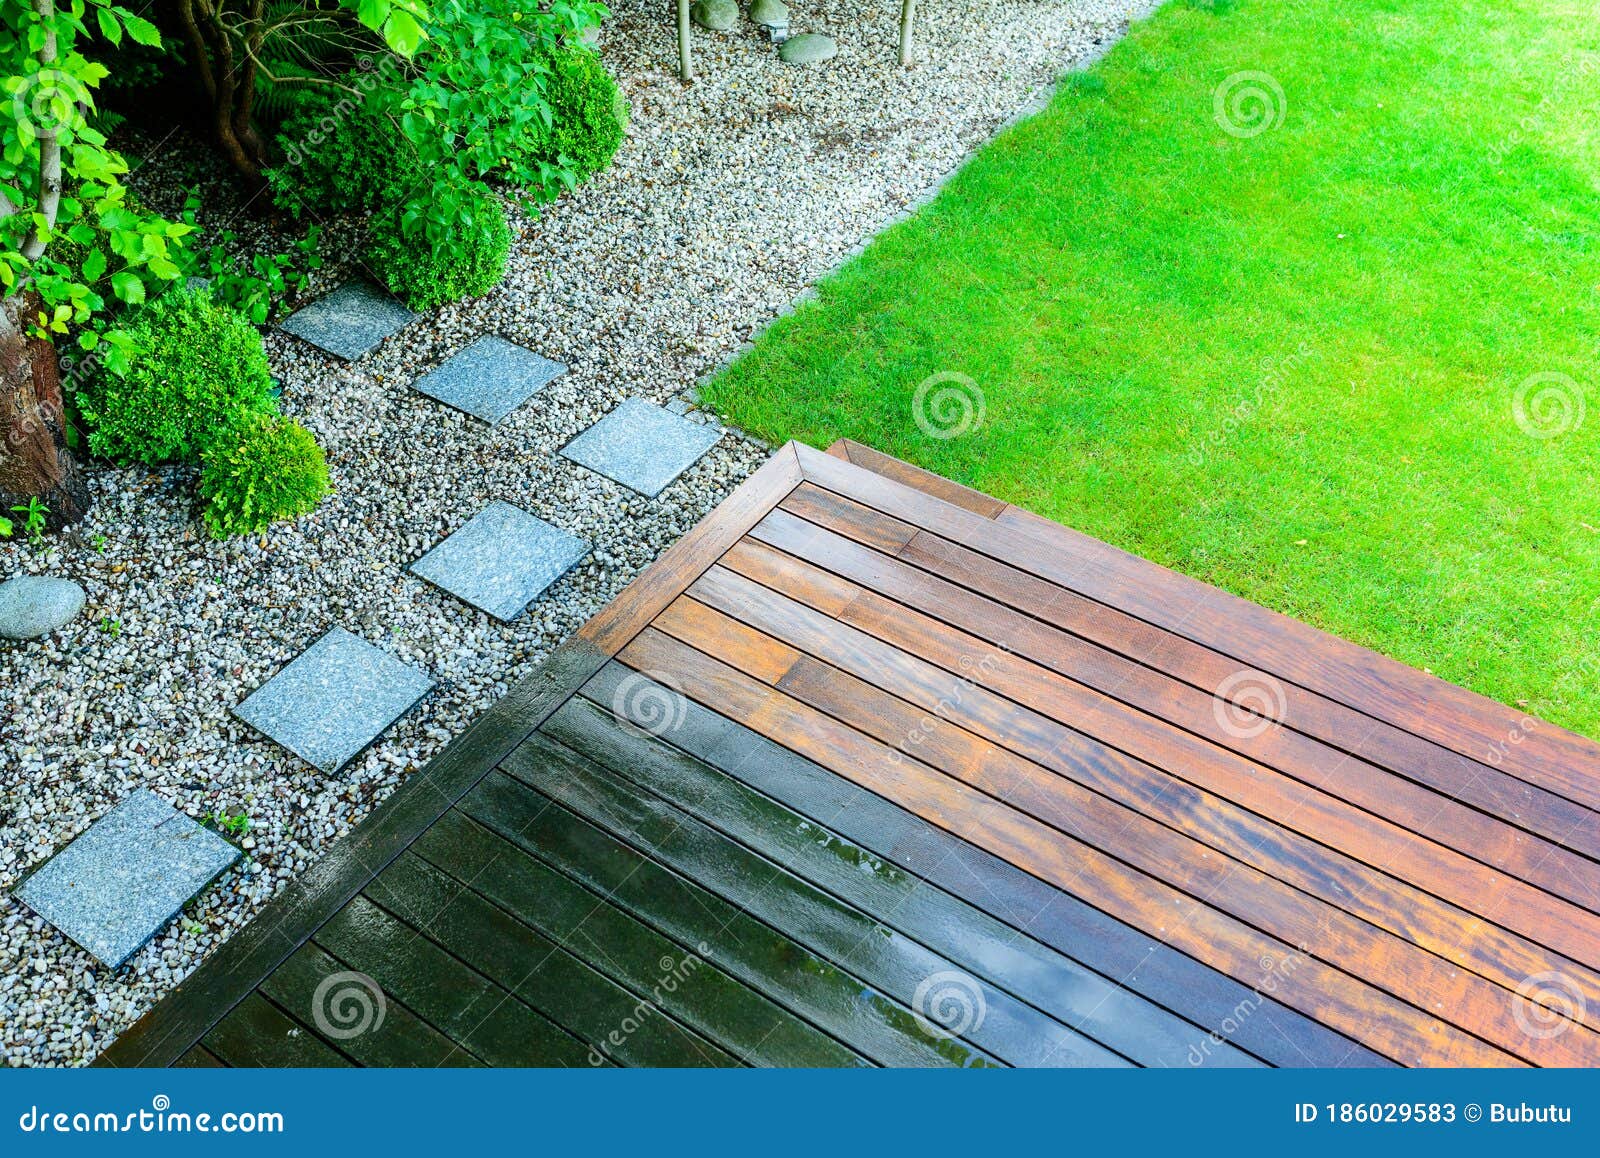 partially cleaned wooden terrace with a pressure washer by the green lawn